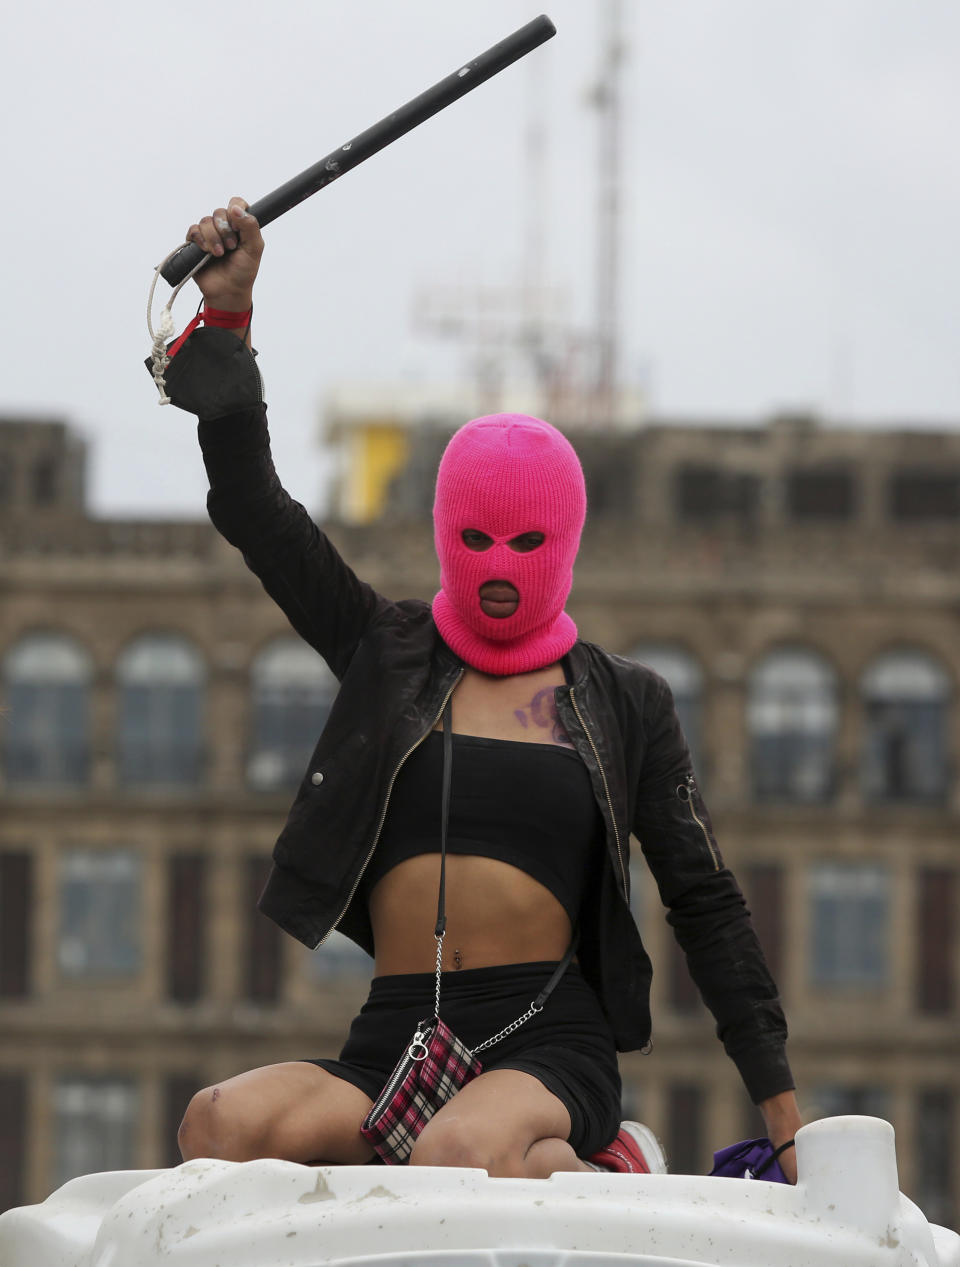 A demonstrator brandishes a baton in front of the National Palace during a march to commemorate International Women's Day and protest against gender violence, in Mexico City, Monday, March 8, 2021. (AP Photo/Ginnette Riquelme)